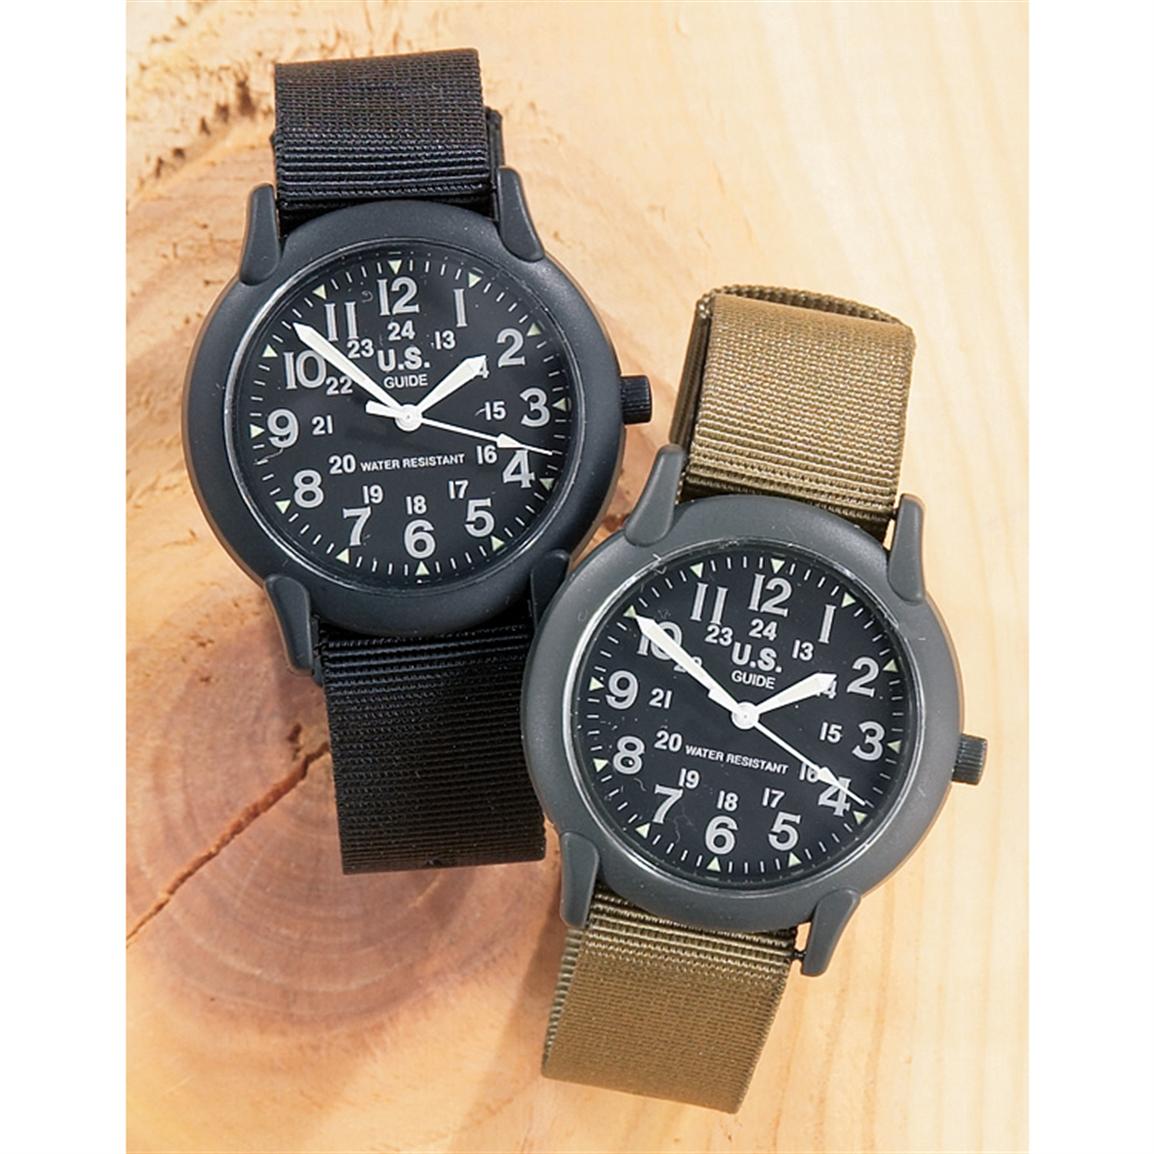 Us Army Watches The Ultimate Guide For Military Timepieces News Military